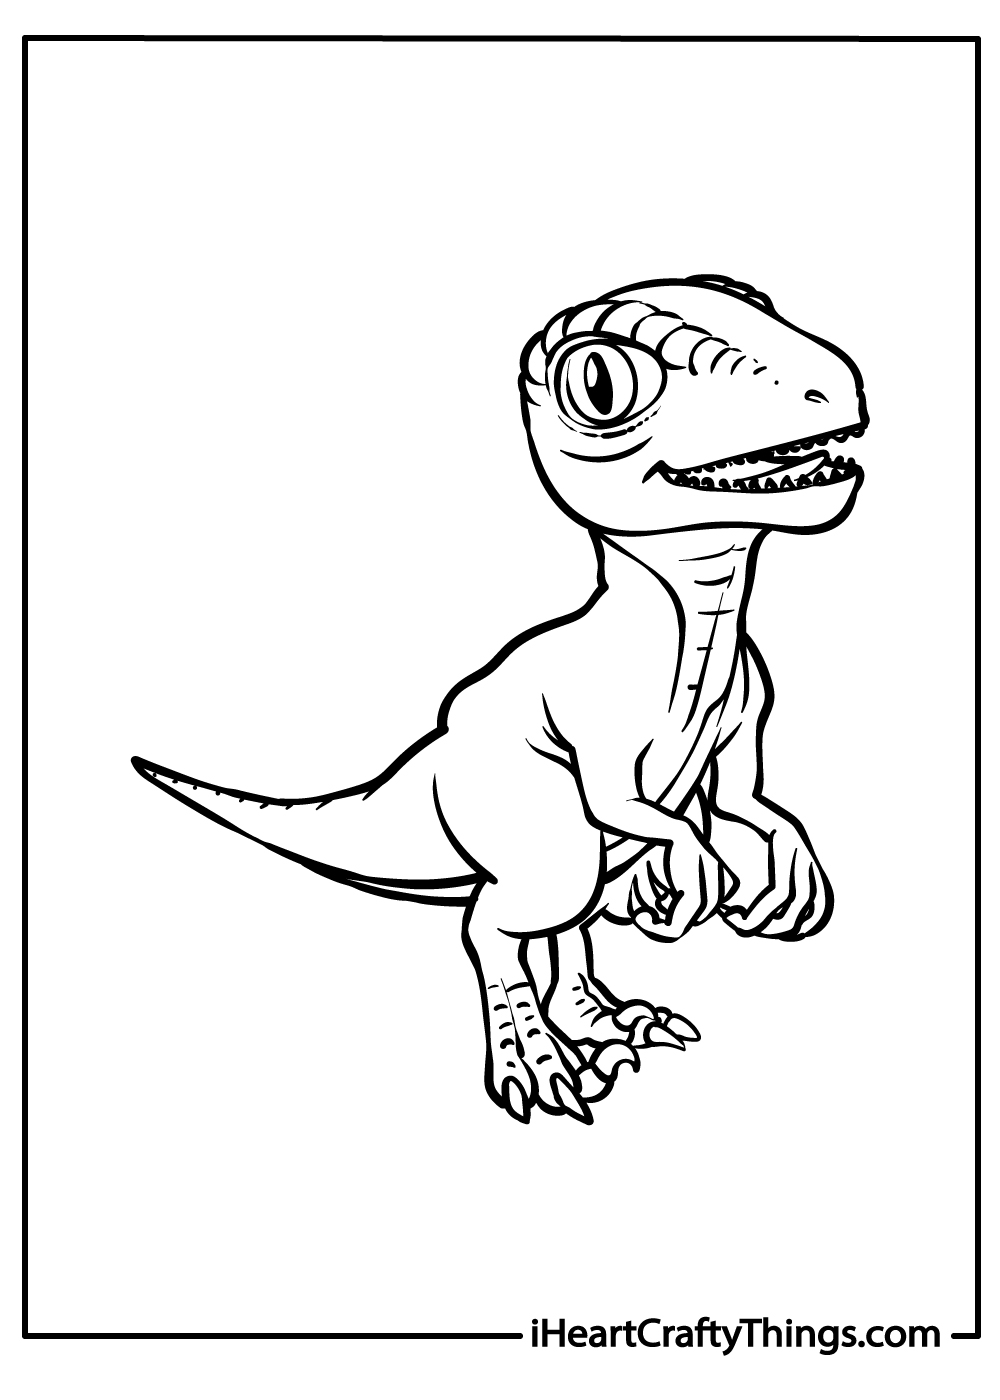 Velociraptor coloring pages free printables